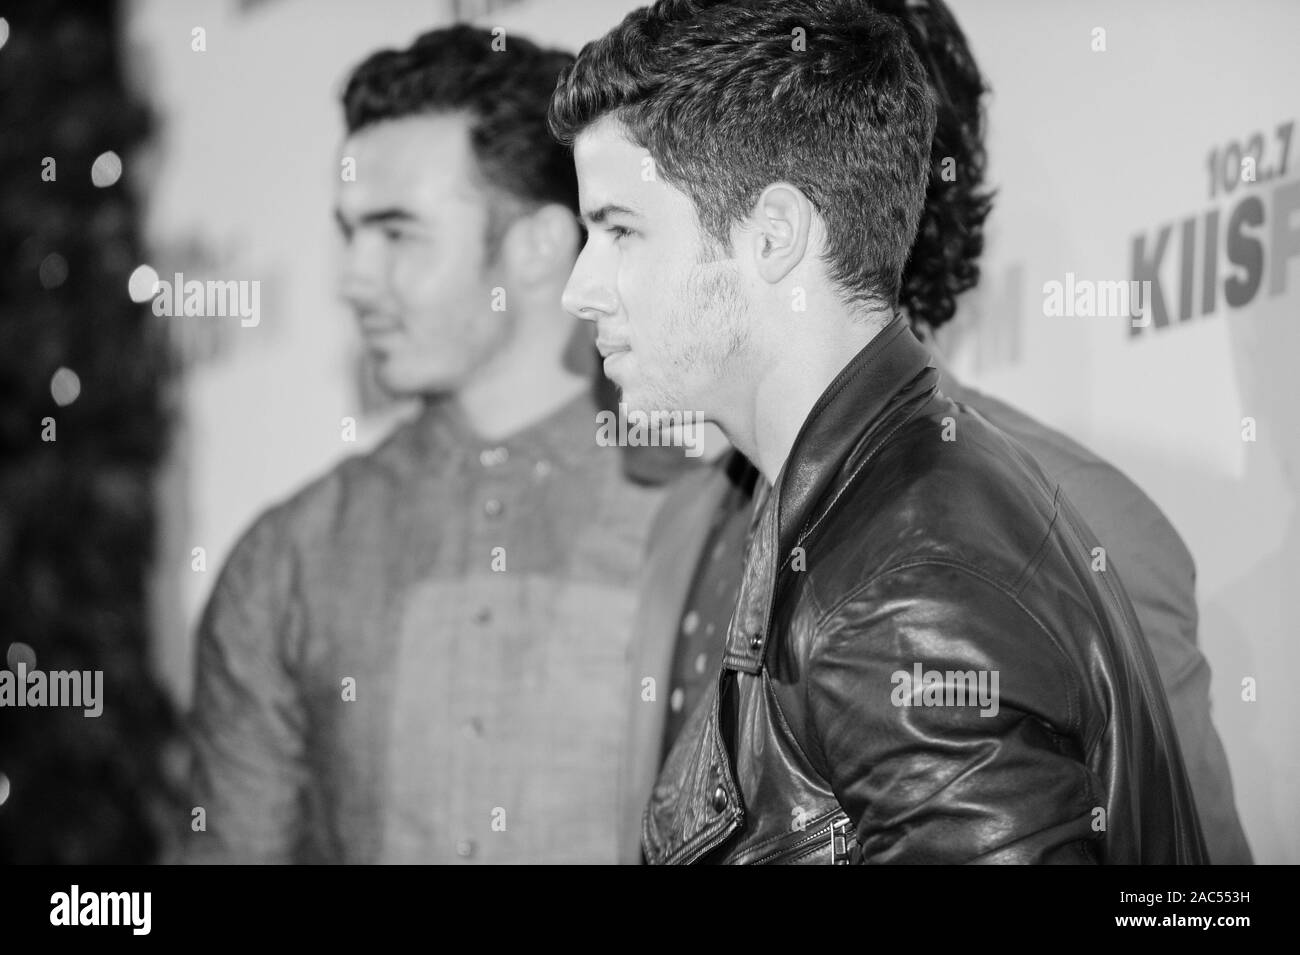 Nick and The Jonas Brothers attend KIIS FM's 2012 Jingle Ball at Nokia Theatre L.A. Live on December 1, 2012 in Los Angeles, California. Stock Photo